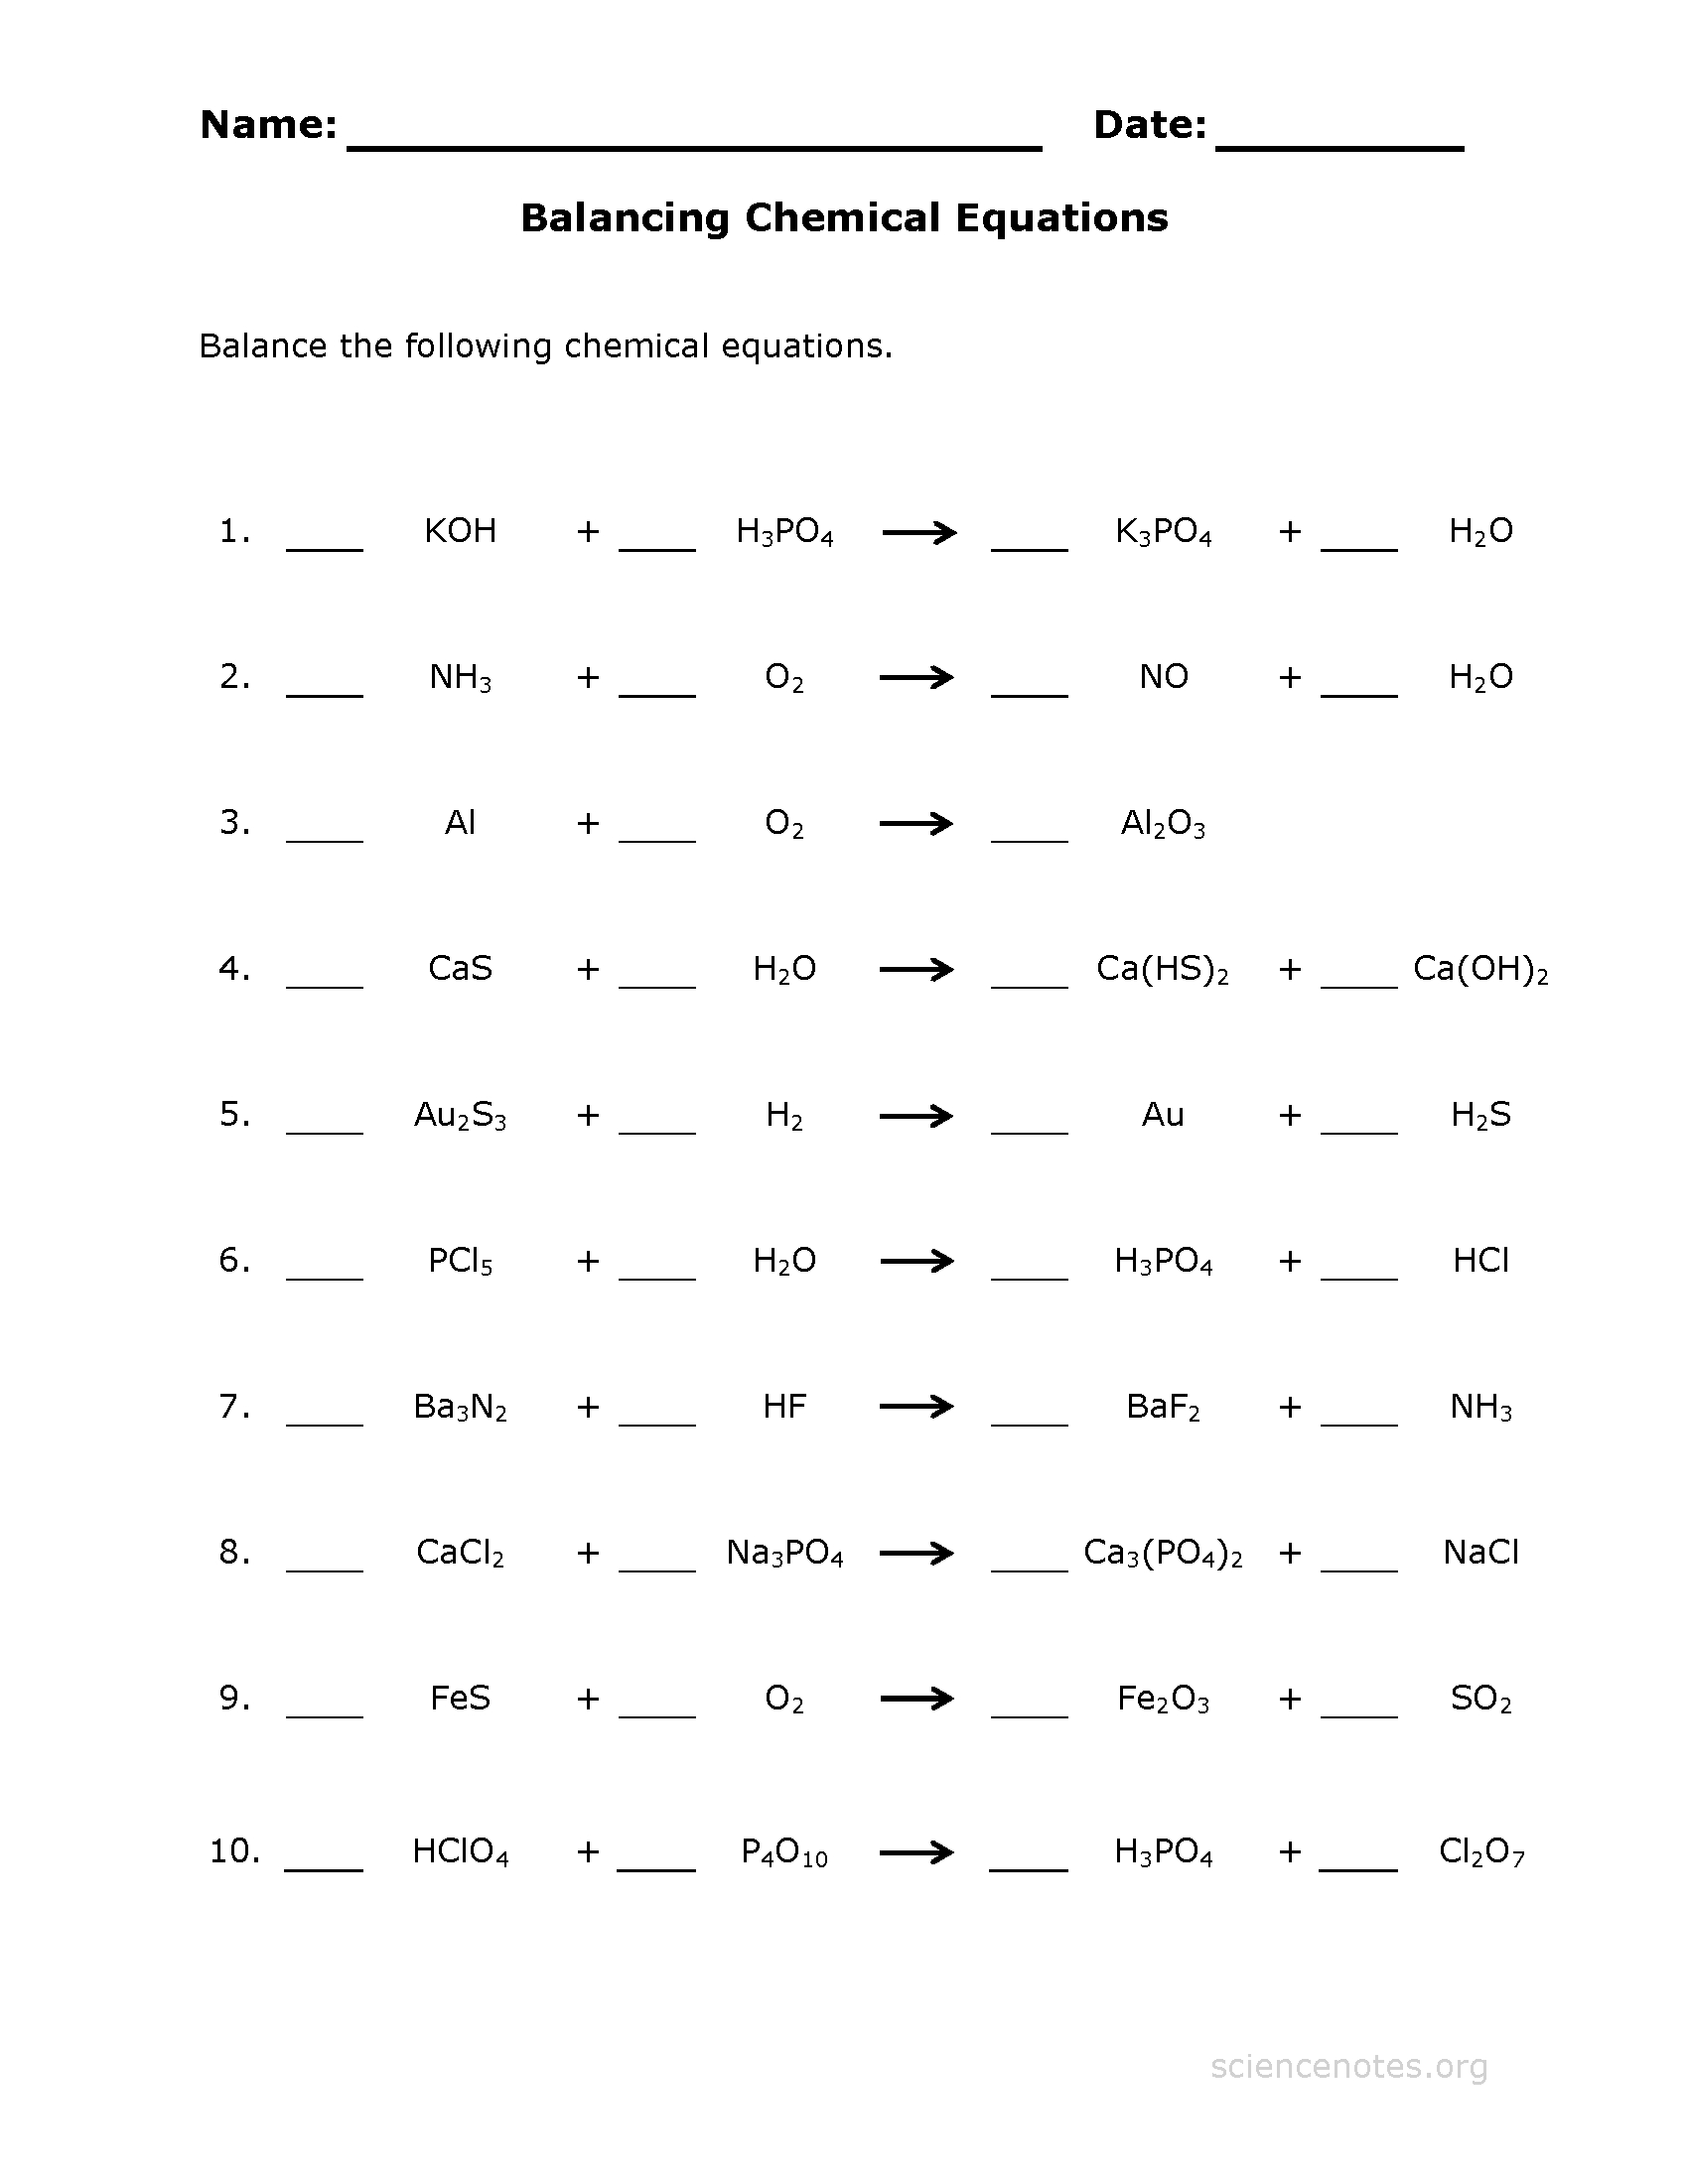 balancing-chemical-equations-practice-worksheet-db-excel